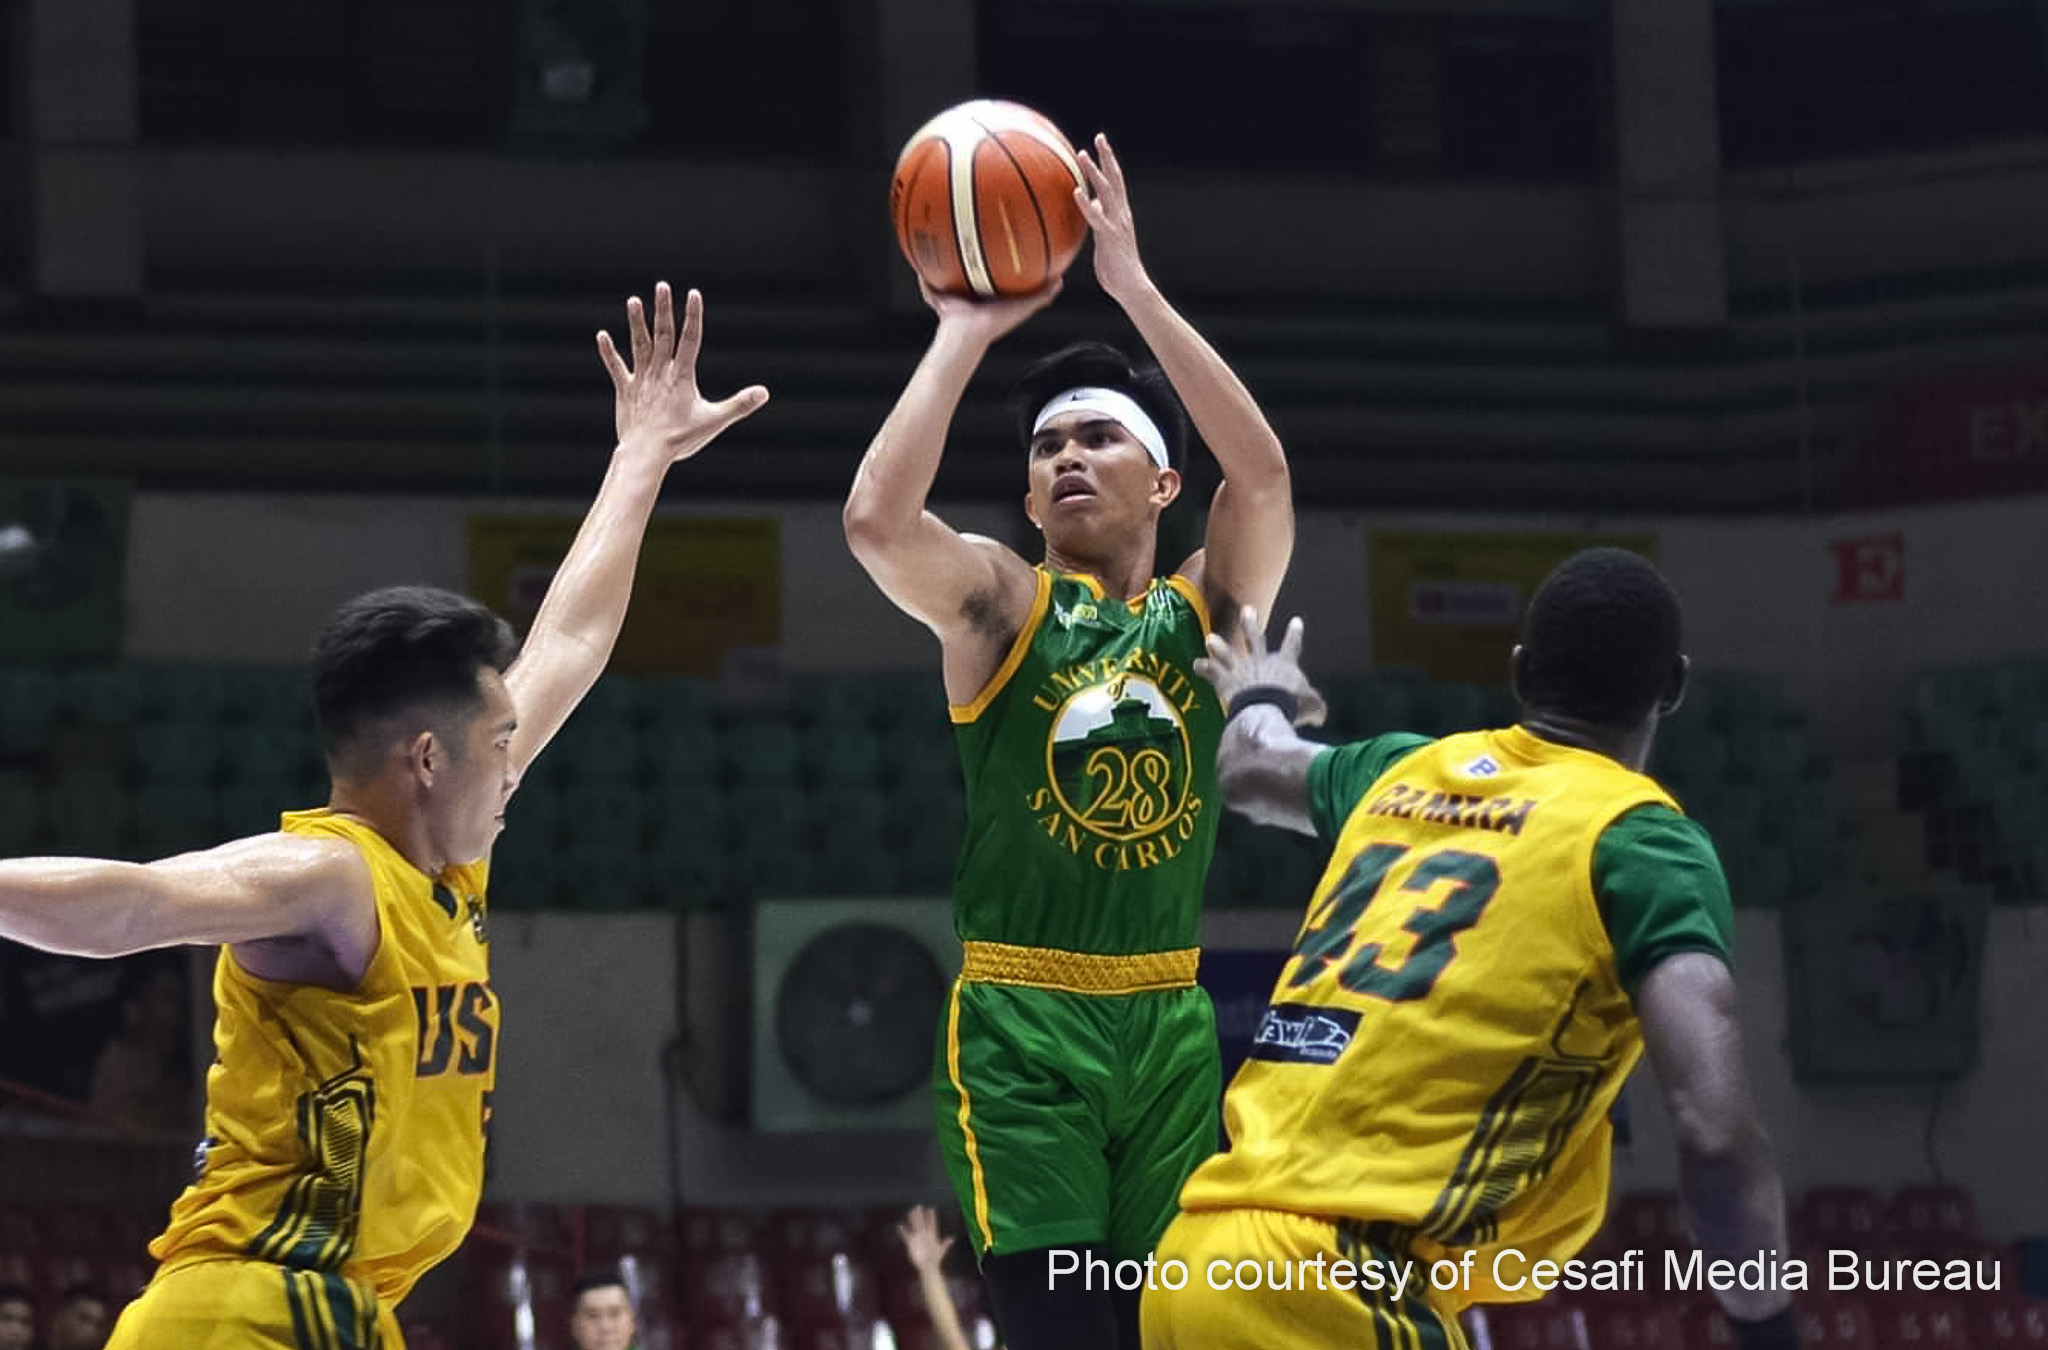 Jellianggao returns from suspension to lift USC past USJ-R